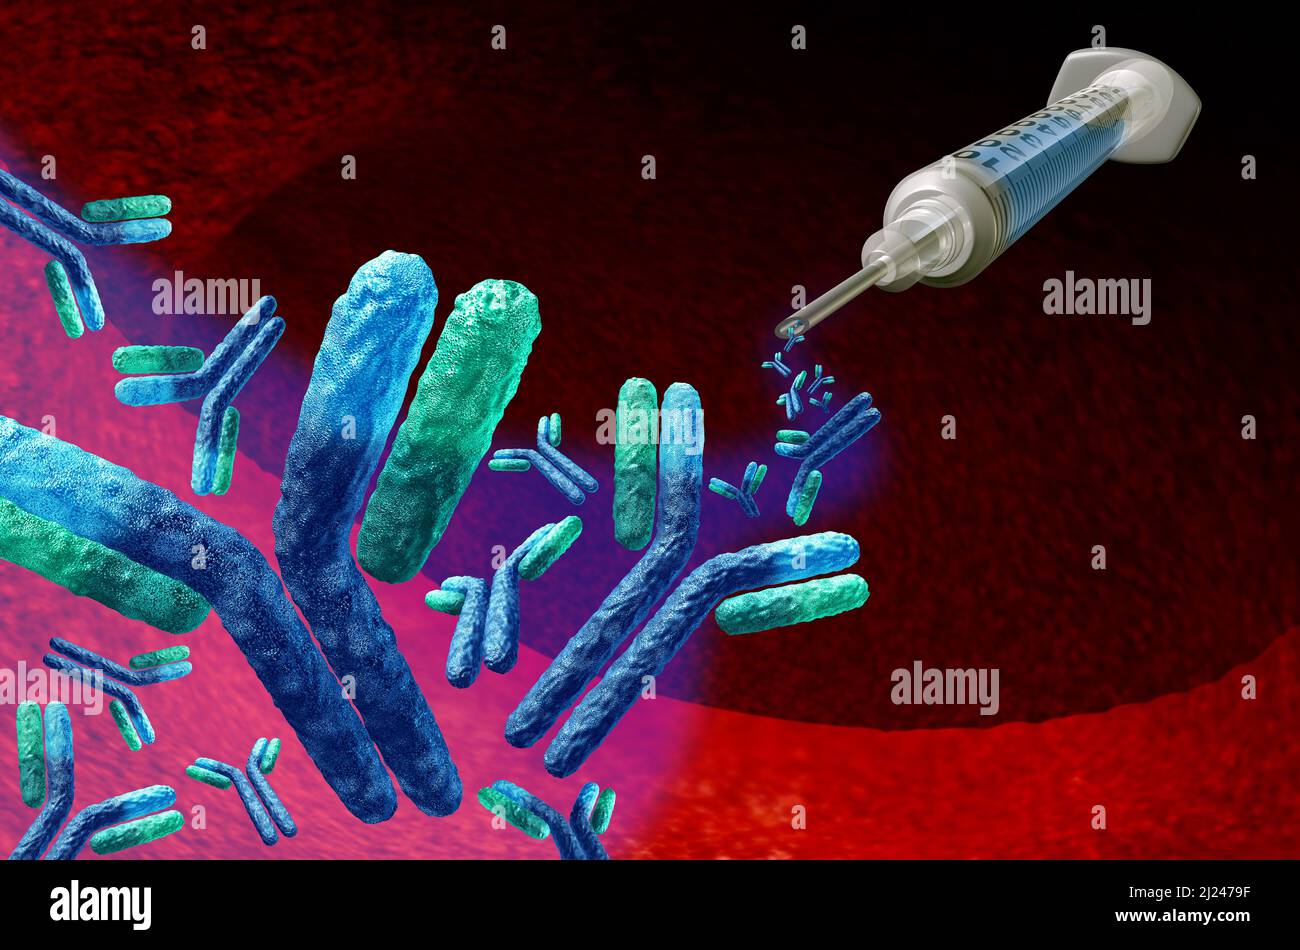 Monoclonal Antibody Treatment and therapies of  antibodies as a cure for virus infection as an immune system medical concept for oncology. Stock Photo